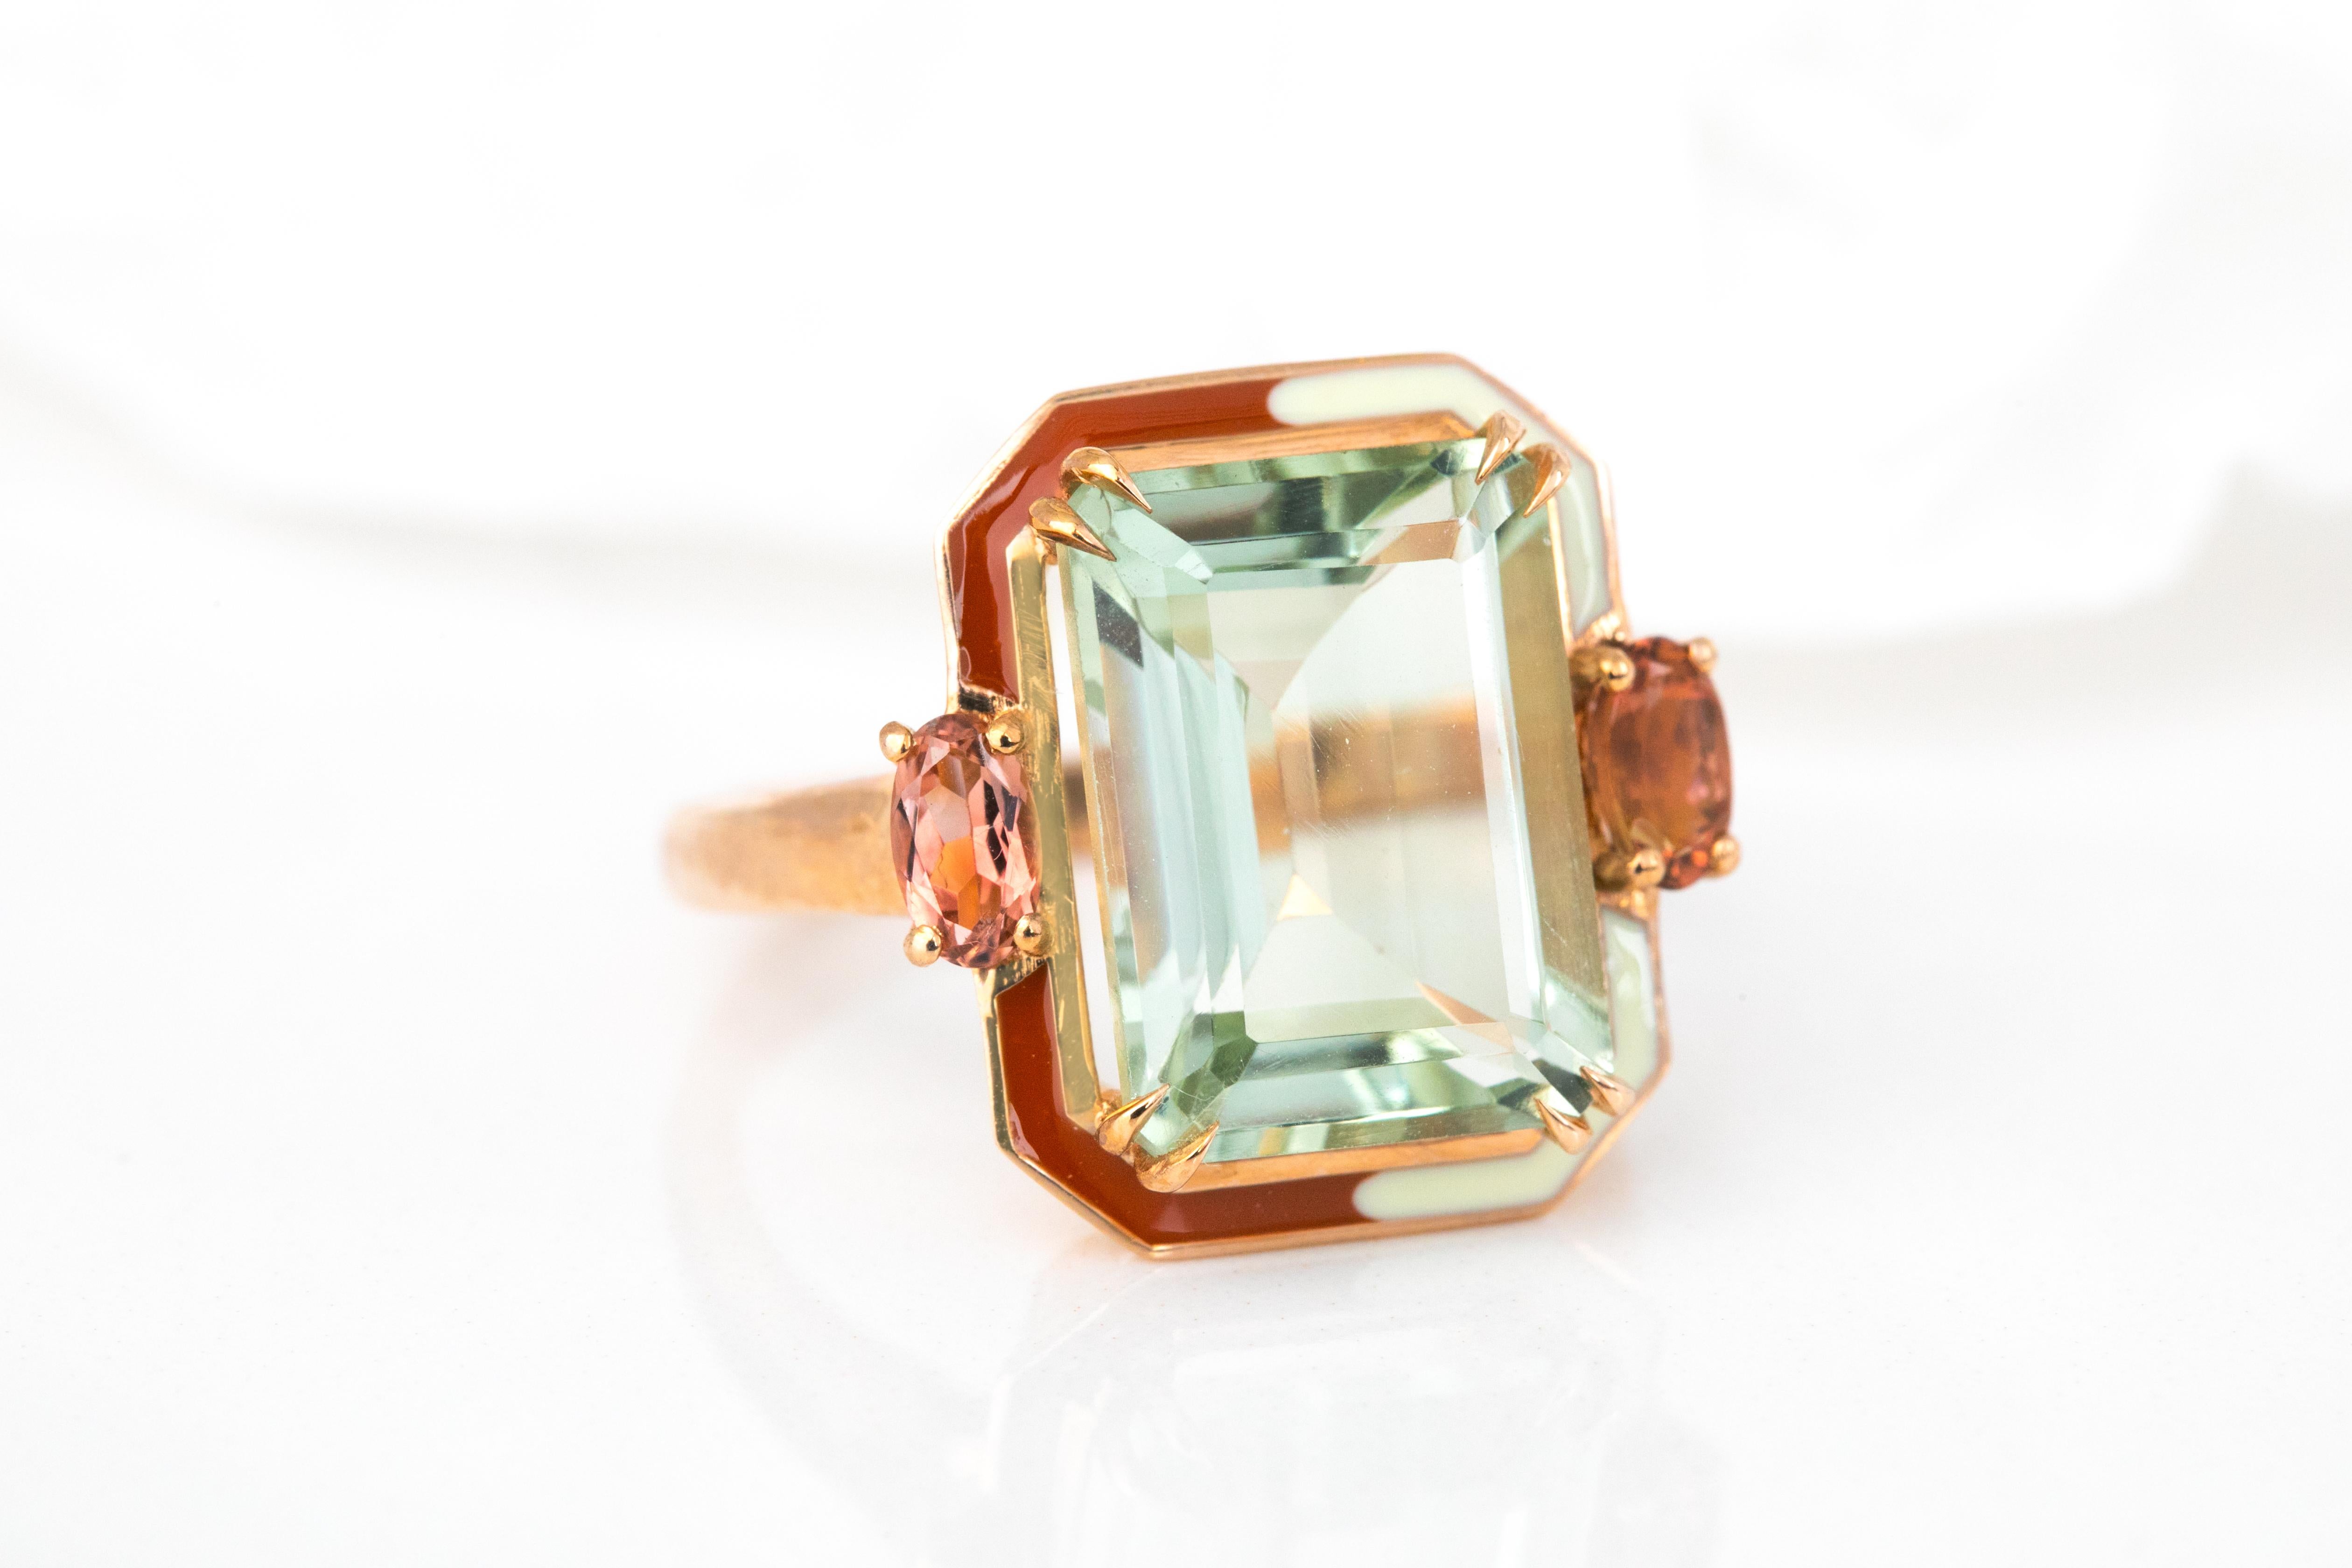 For Sale:  Artdeco Style Ring, 14k Solid Gold, Green Amethyst and Pink Tourmaline Stone Ring 2